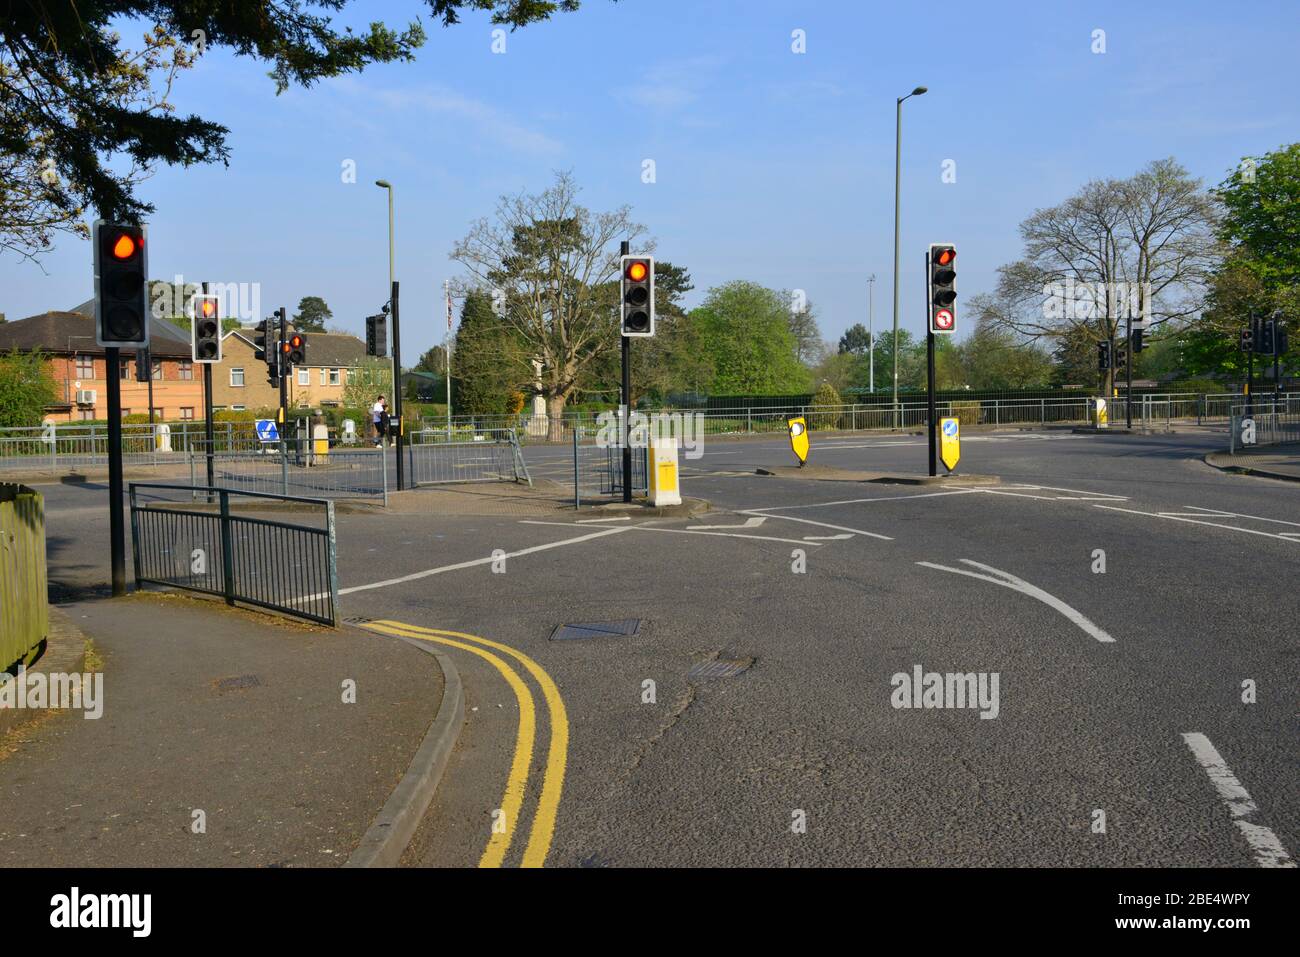 Empty traffic light during the Covid-19 Lock down in Horley, Surrey.  Being within 1 mile from Gatwick airport these lights are normally very busy. Stock Photo